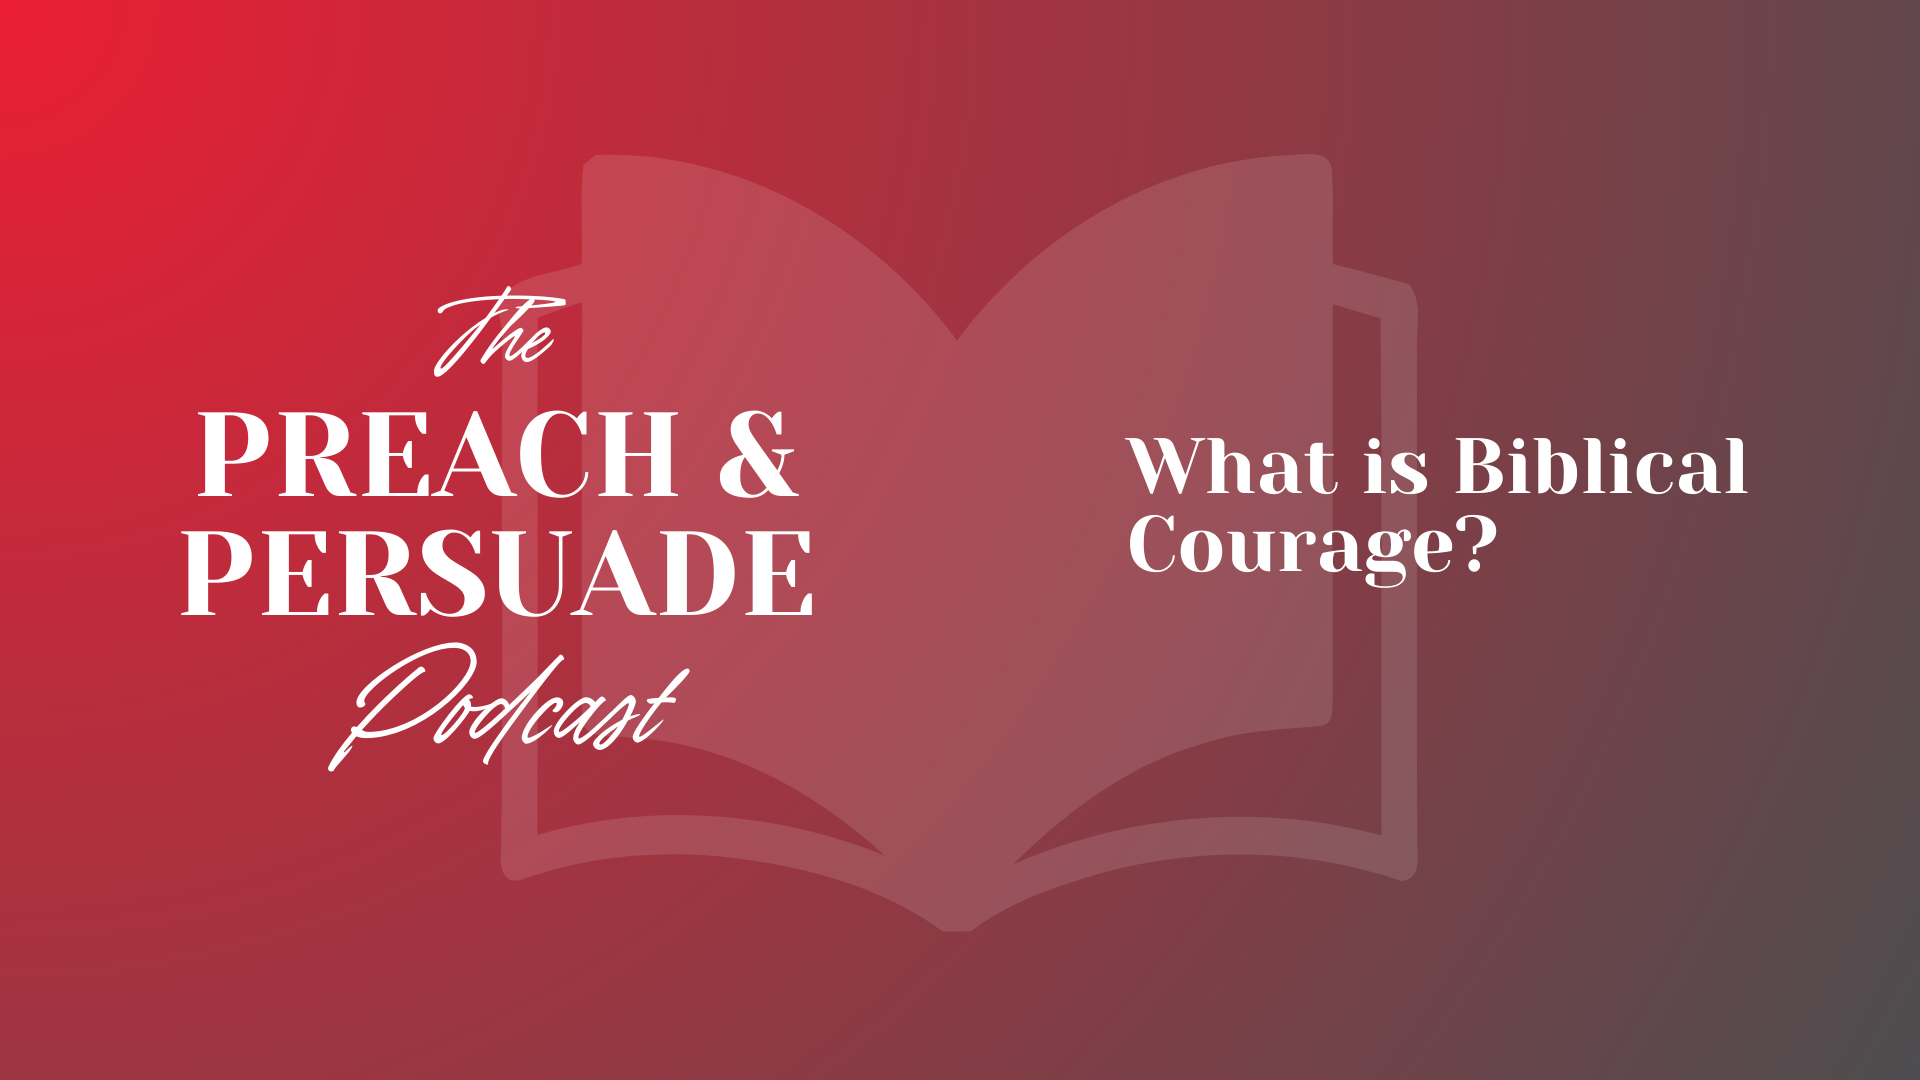 What is Biblical Courage?